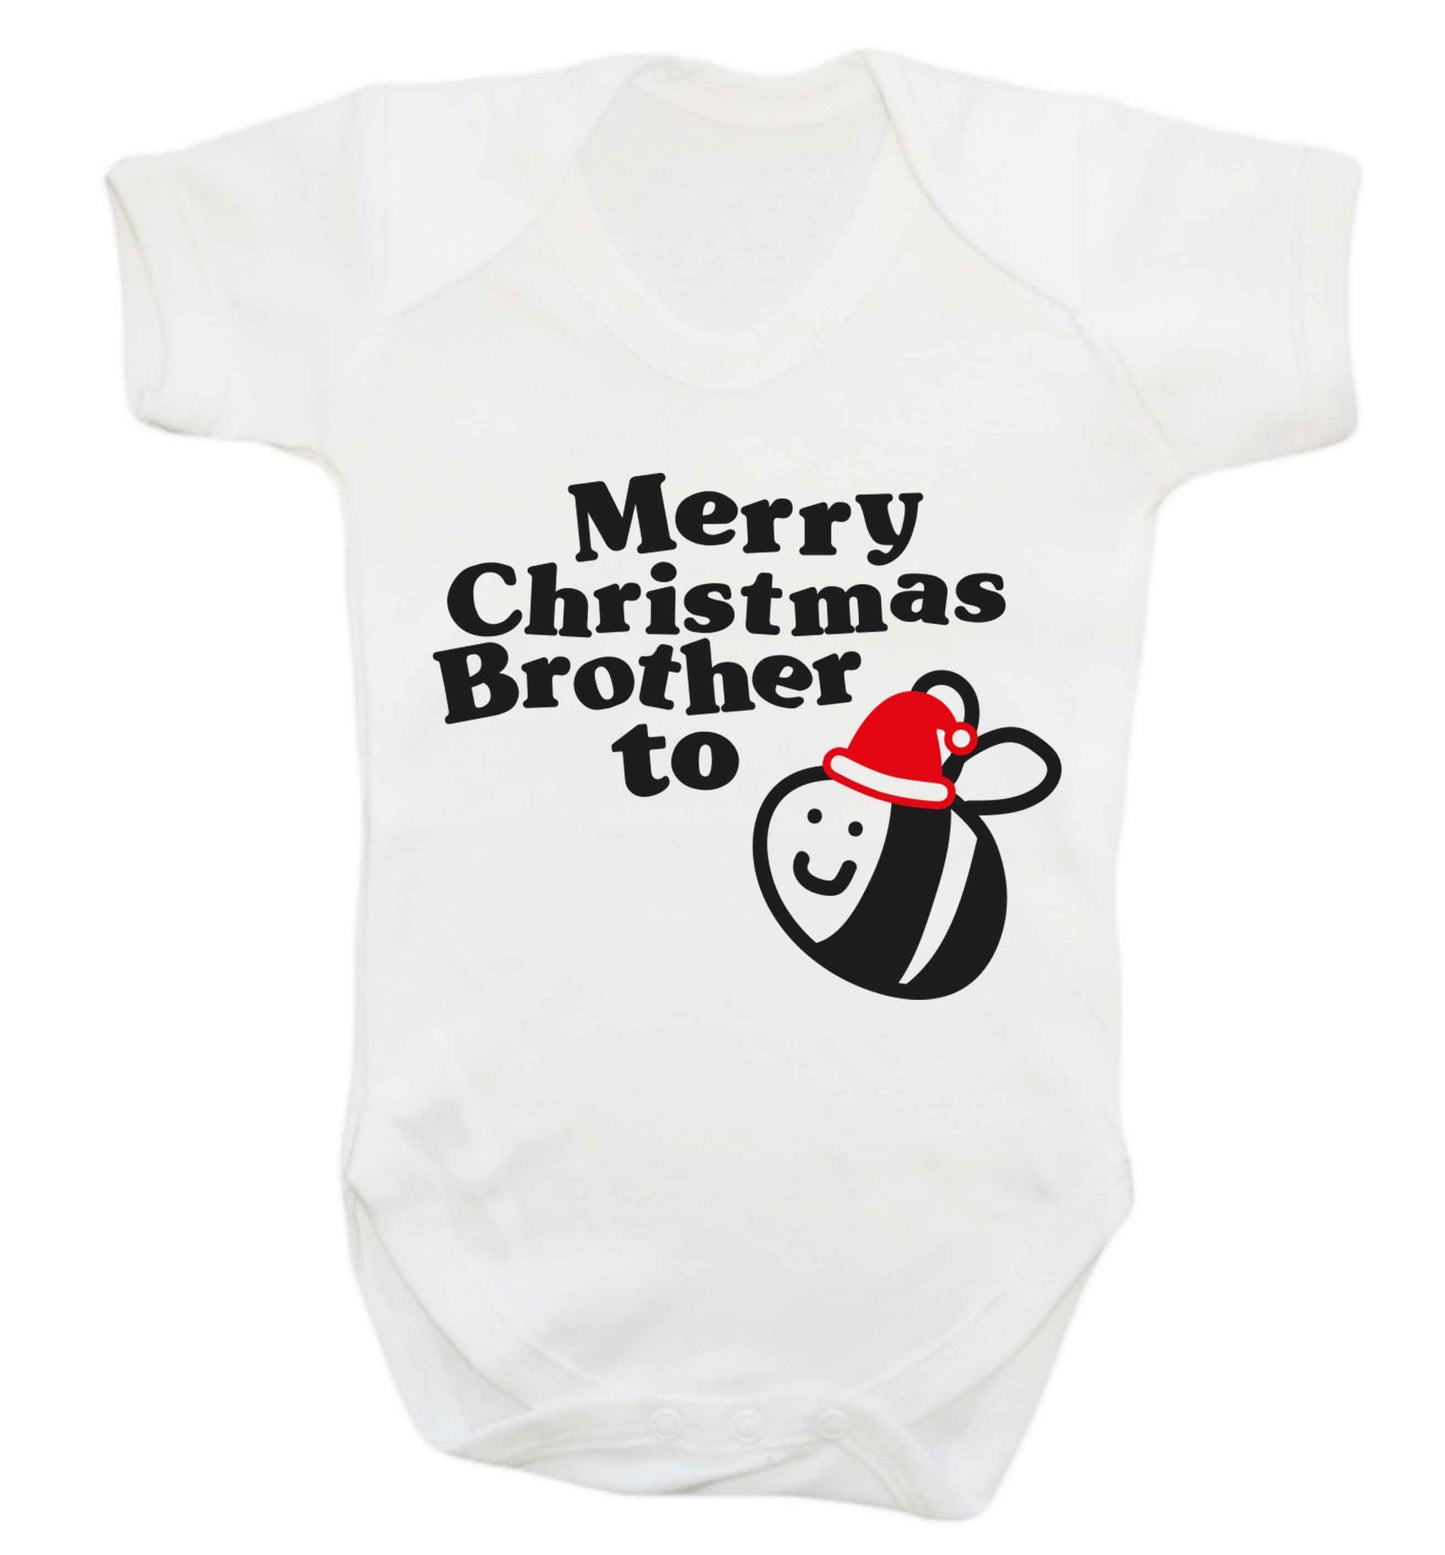 Merry Christmas brother to be Baby Vest white 18-24 months